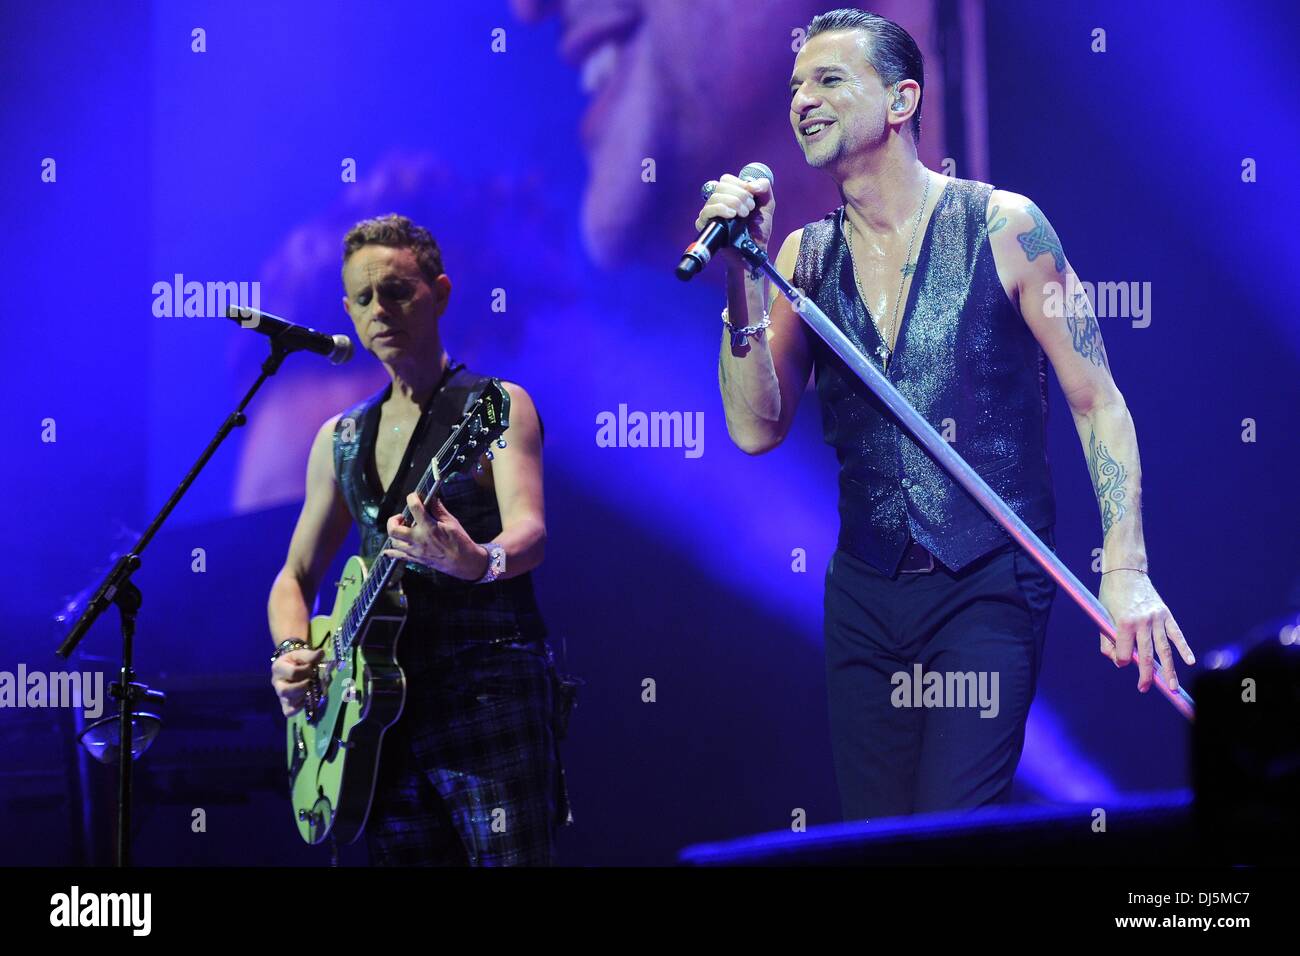 Cologne, Germany. 21st Nov, 2013. Singer Dave Gahan (R) and guitarist  Martin Gore from the band Depeche Mode stands during the first German  concert of the European winter tour at Lanxess Arena